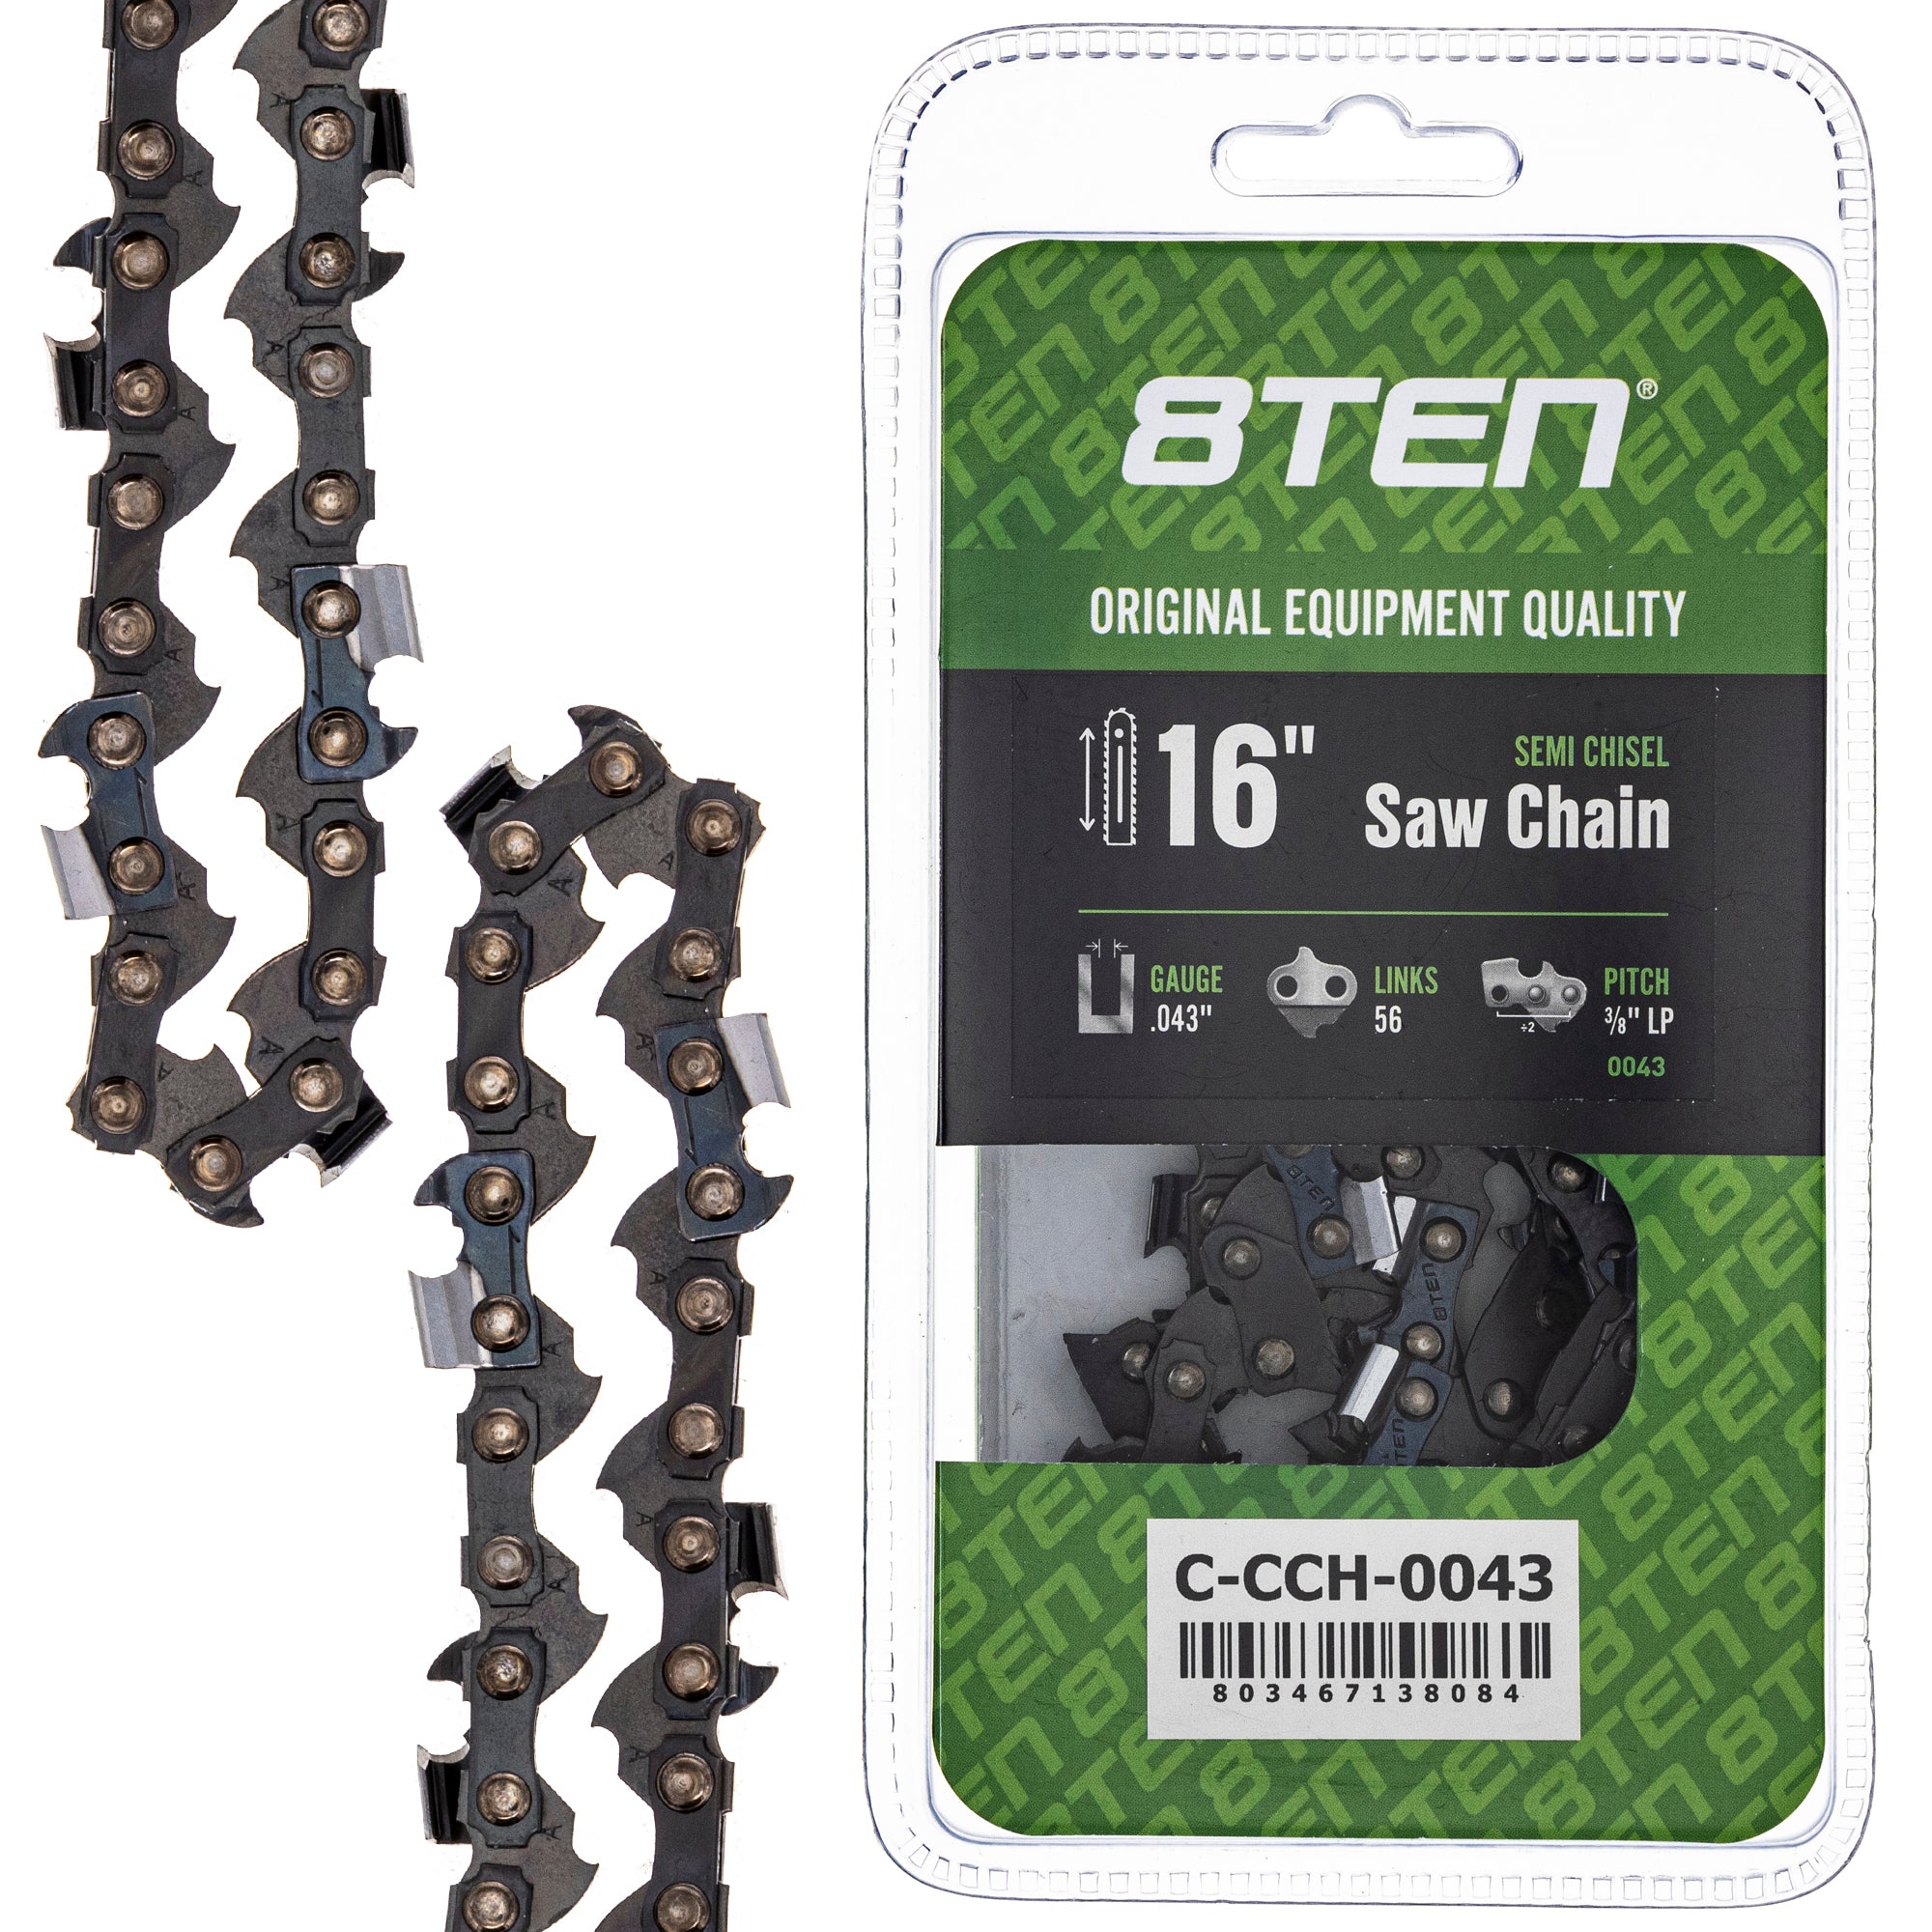 Chainsaw Chain 16 Inch .043 3/8 LP 56DL for zOTHER Oregon XCU04 XCU03 UC4551A UC4550A 8TEN 810-CCC2265H